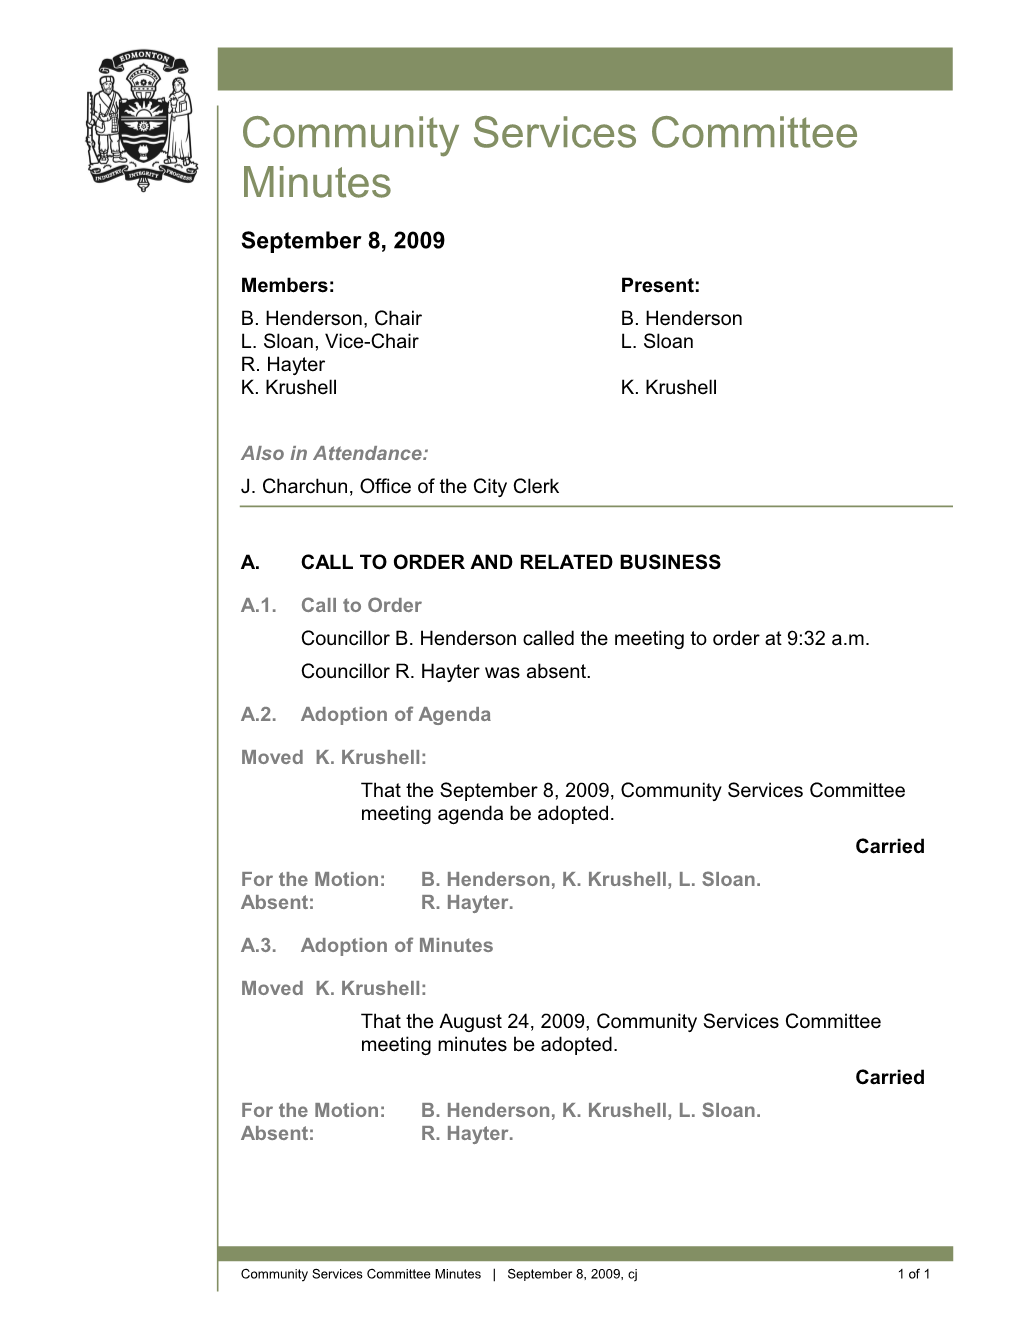 Minutes for Community Services Committee September 8, 2009 Meeting